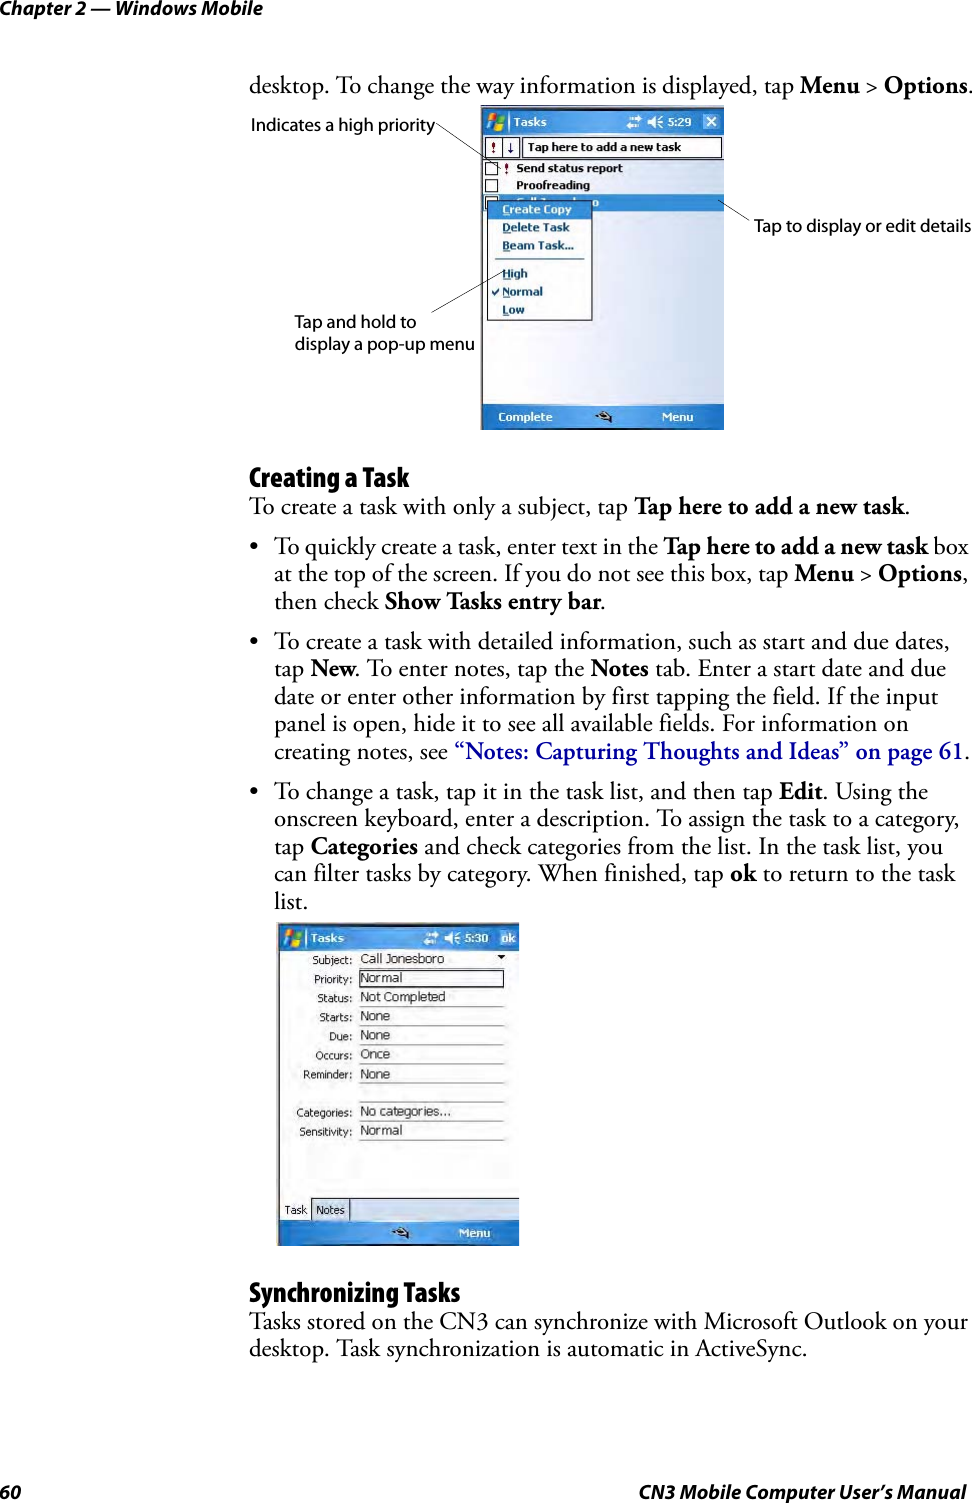 Chapter 2 — Windows Mobile60 CN3 Mobile Computer User’s Manualdesktop. To change the way information is displayed, tap Menu &gt; Options.Creating a TaskTo create a task with only a subject, tap Tap here to add a new task.• To quickly create a task, enter text in the Tap here to add a new task box at the top of the screen. If you do not see this box, tap Menu &gt; Options, then check Show Tasks entry bar.• To create a task with detailed information, such as start and due dates, tap New. To enter notes, tap the Notes tab. Enter a start date and due date or enter other information by first tapping the field. If the input panel is open, hide it to see all available fields. For information on creating notes, see “Notes: Capturing Thoughts and Ideas” on page 61.• To change a task, tap it in the task list, and then tap Edit. Using the onscreen keyboard, enter a description. To assign the task to a category, tap Categories and check categories from the list. In the task list, you can filter tasks by category. When finished, tap ok to return to the task list.Synchronizing TasksTasks stored on the CN3 can synchronize with Microsoft Outlook on your desktop. Task synchronization is automatic in ActiveSync.Indicates a high priorityTap to display or edit detailsTap and hold to display a pop-up menu